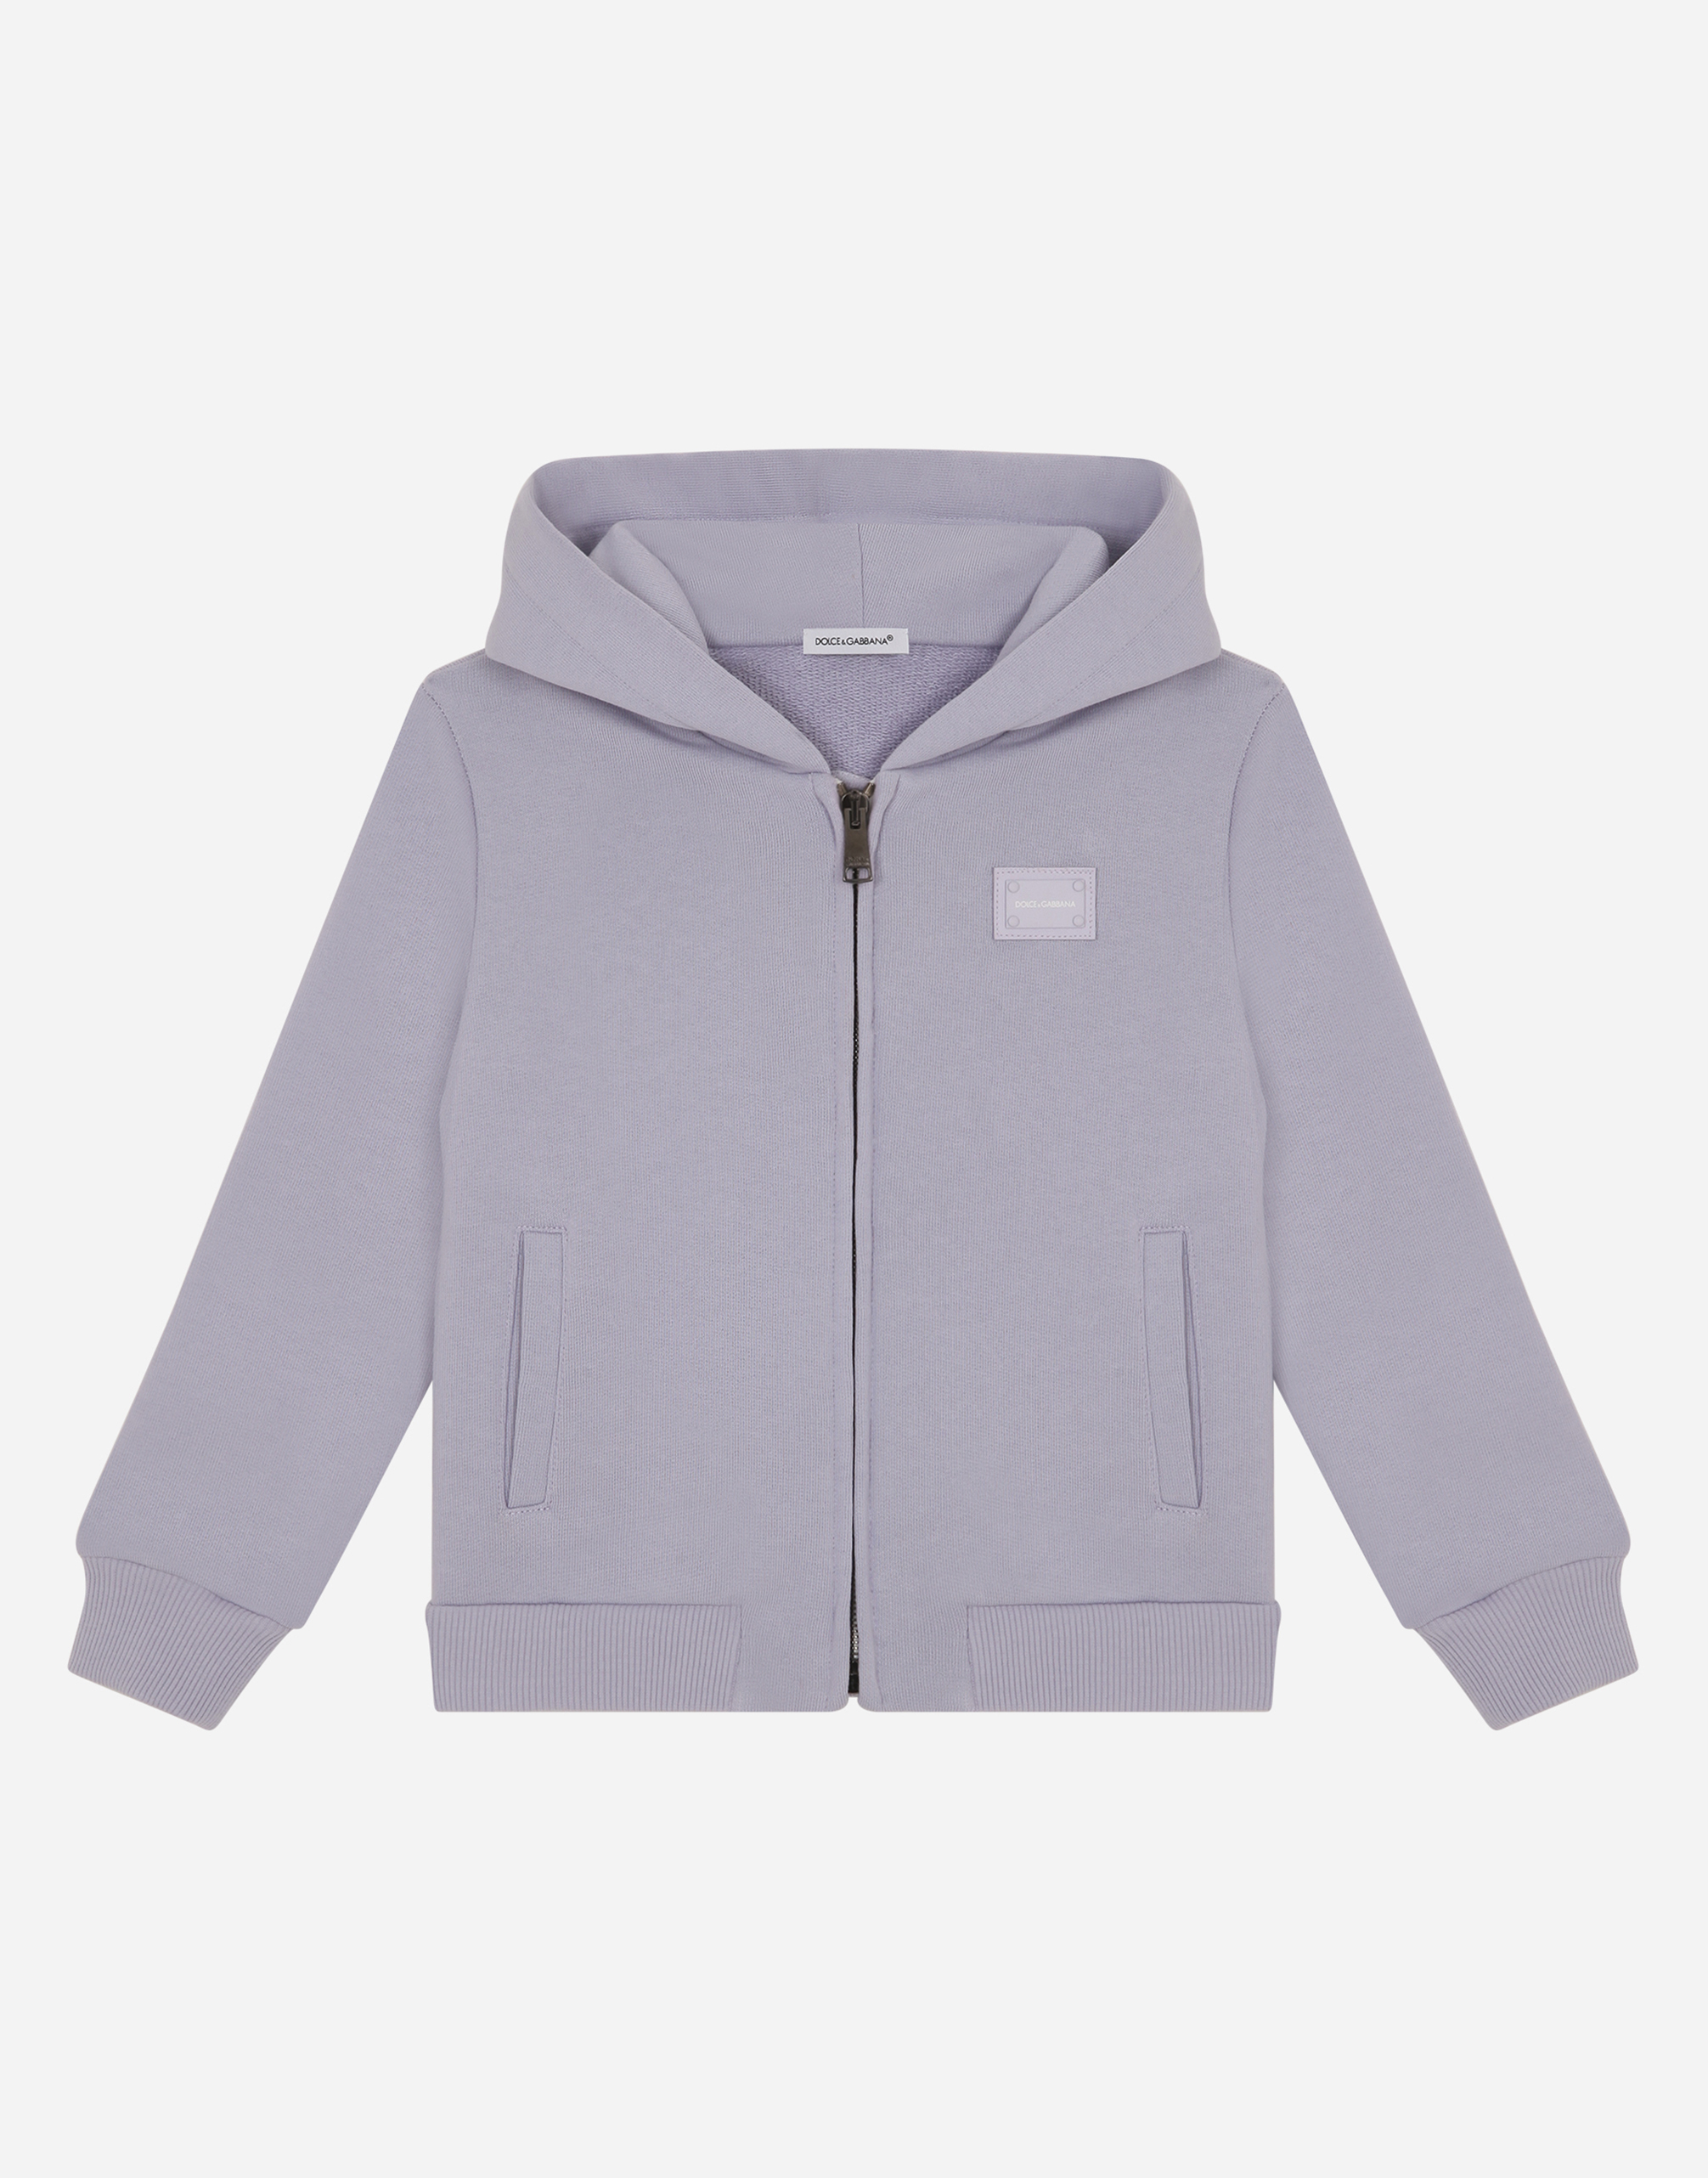 Jersey hoodie with plate in Wisteria